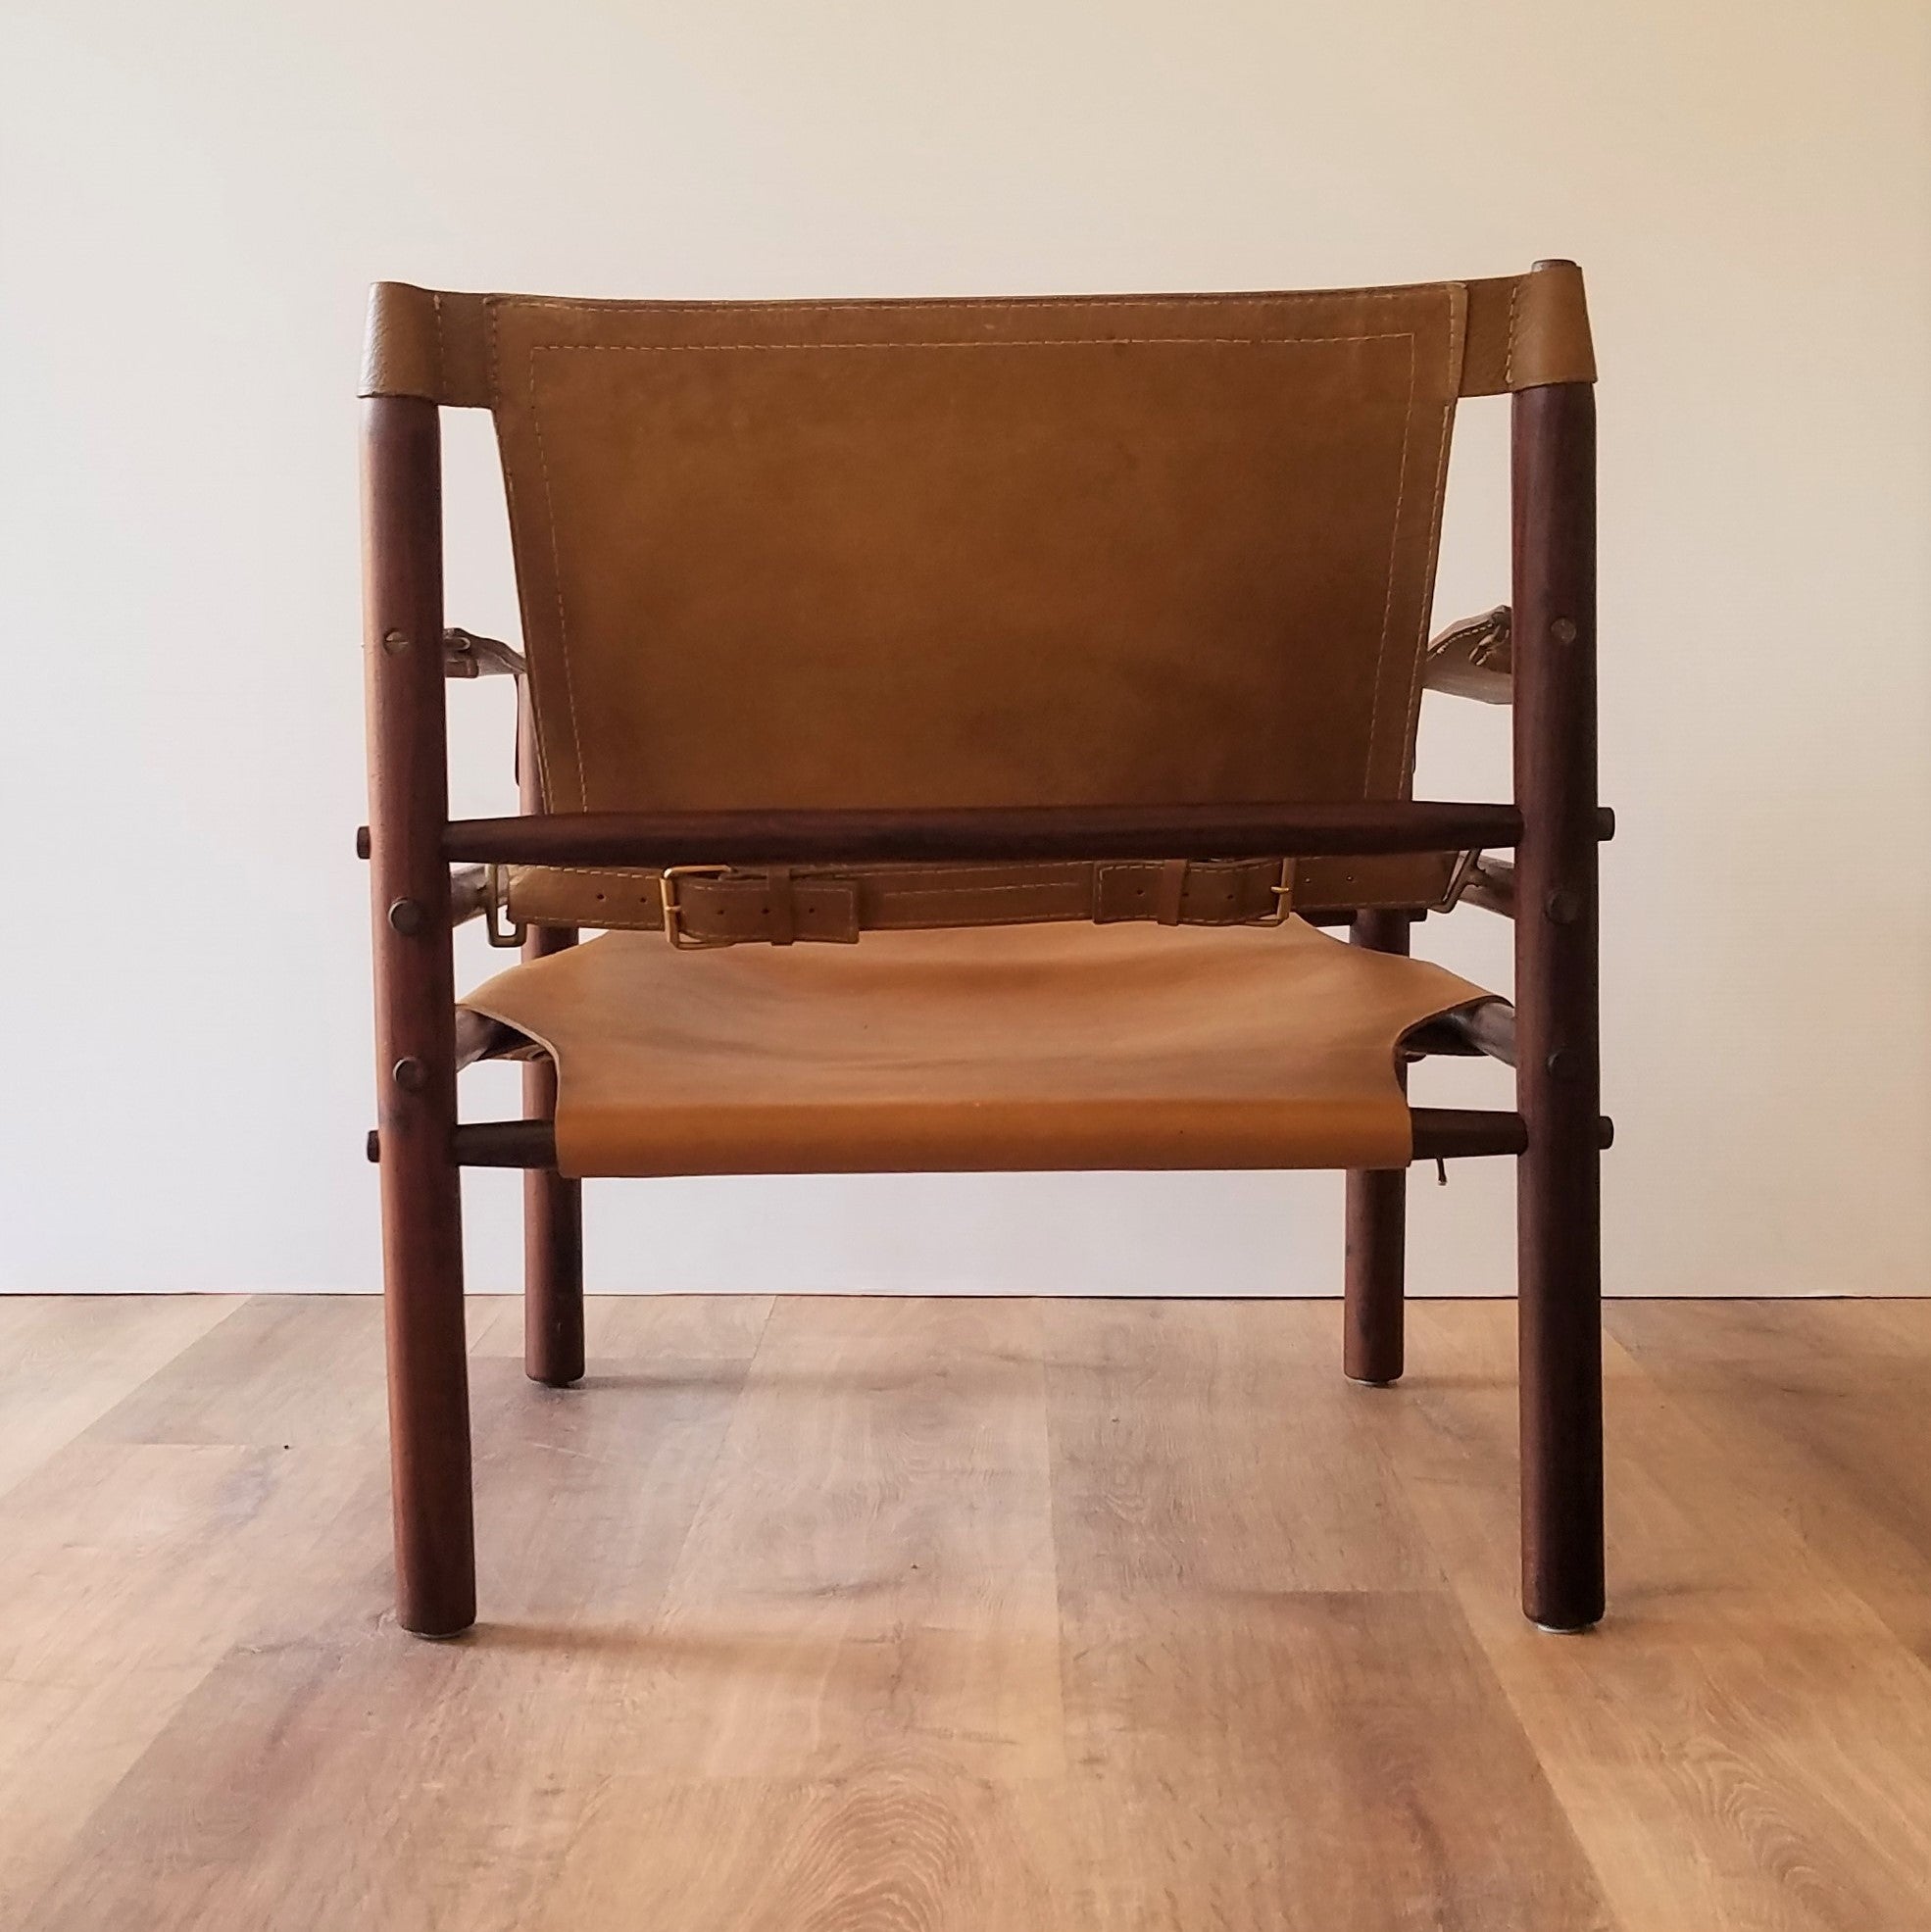 Back View of  Swedish Mid-Century  'Sirocco' Safair Lounge Chair by Arne Norell for Möbel AB, Sweden in Seattle, Washington.